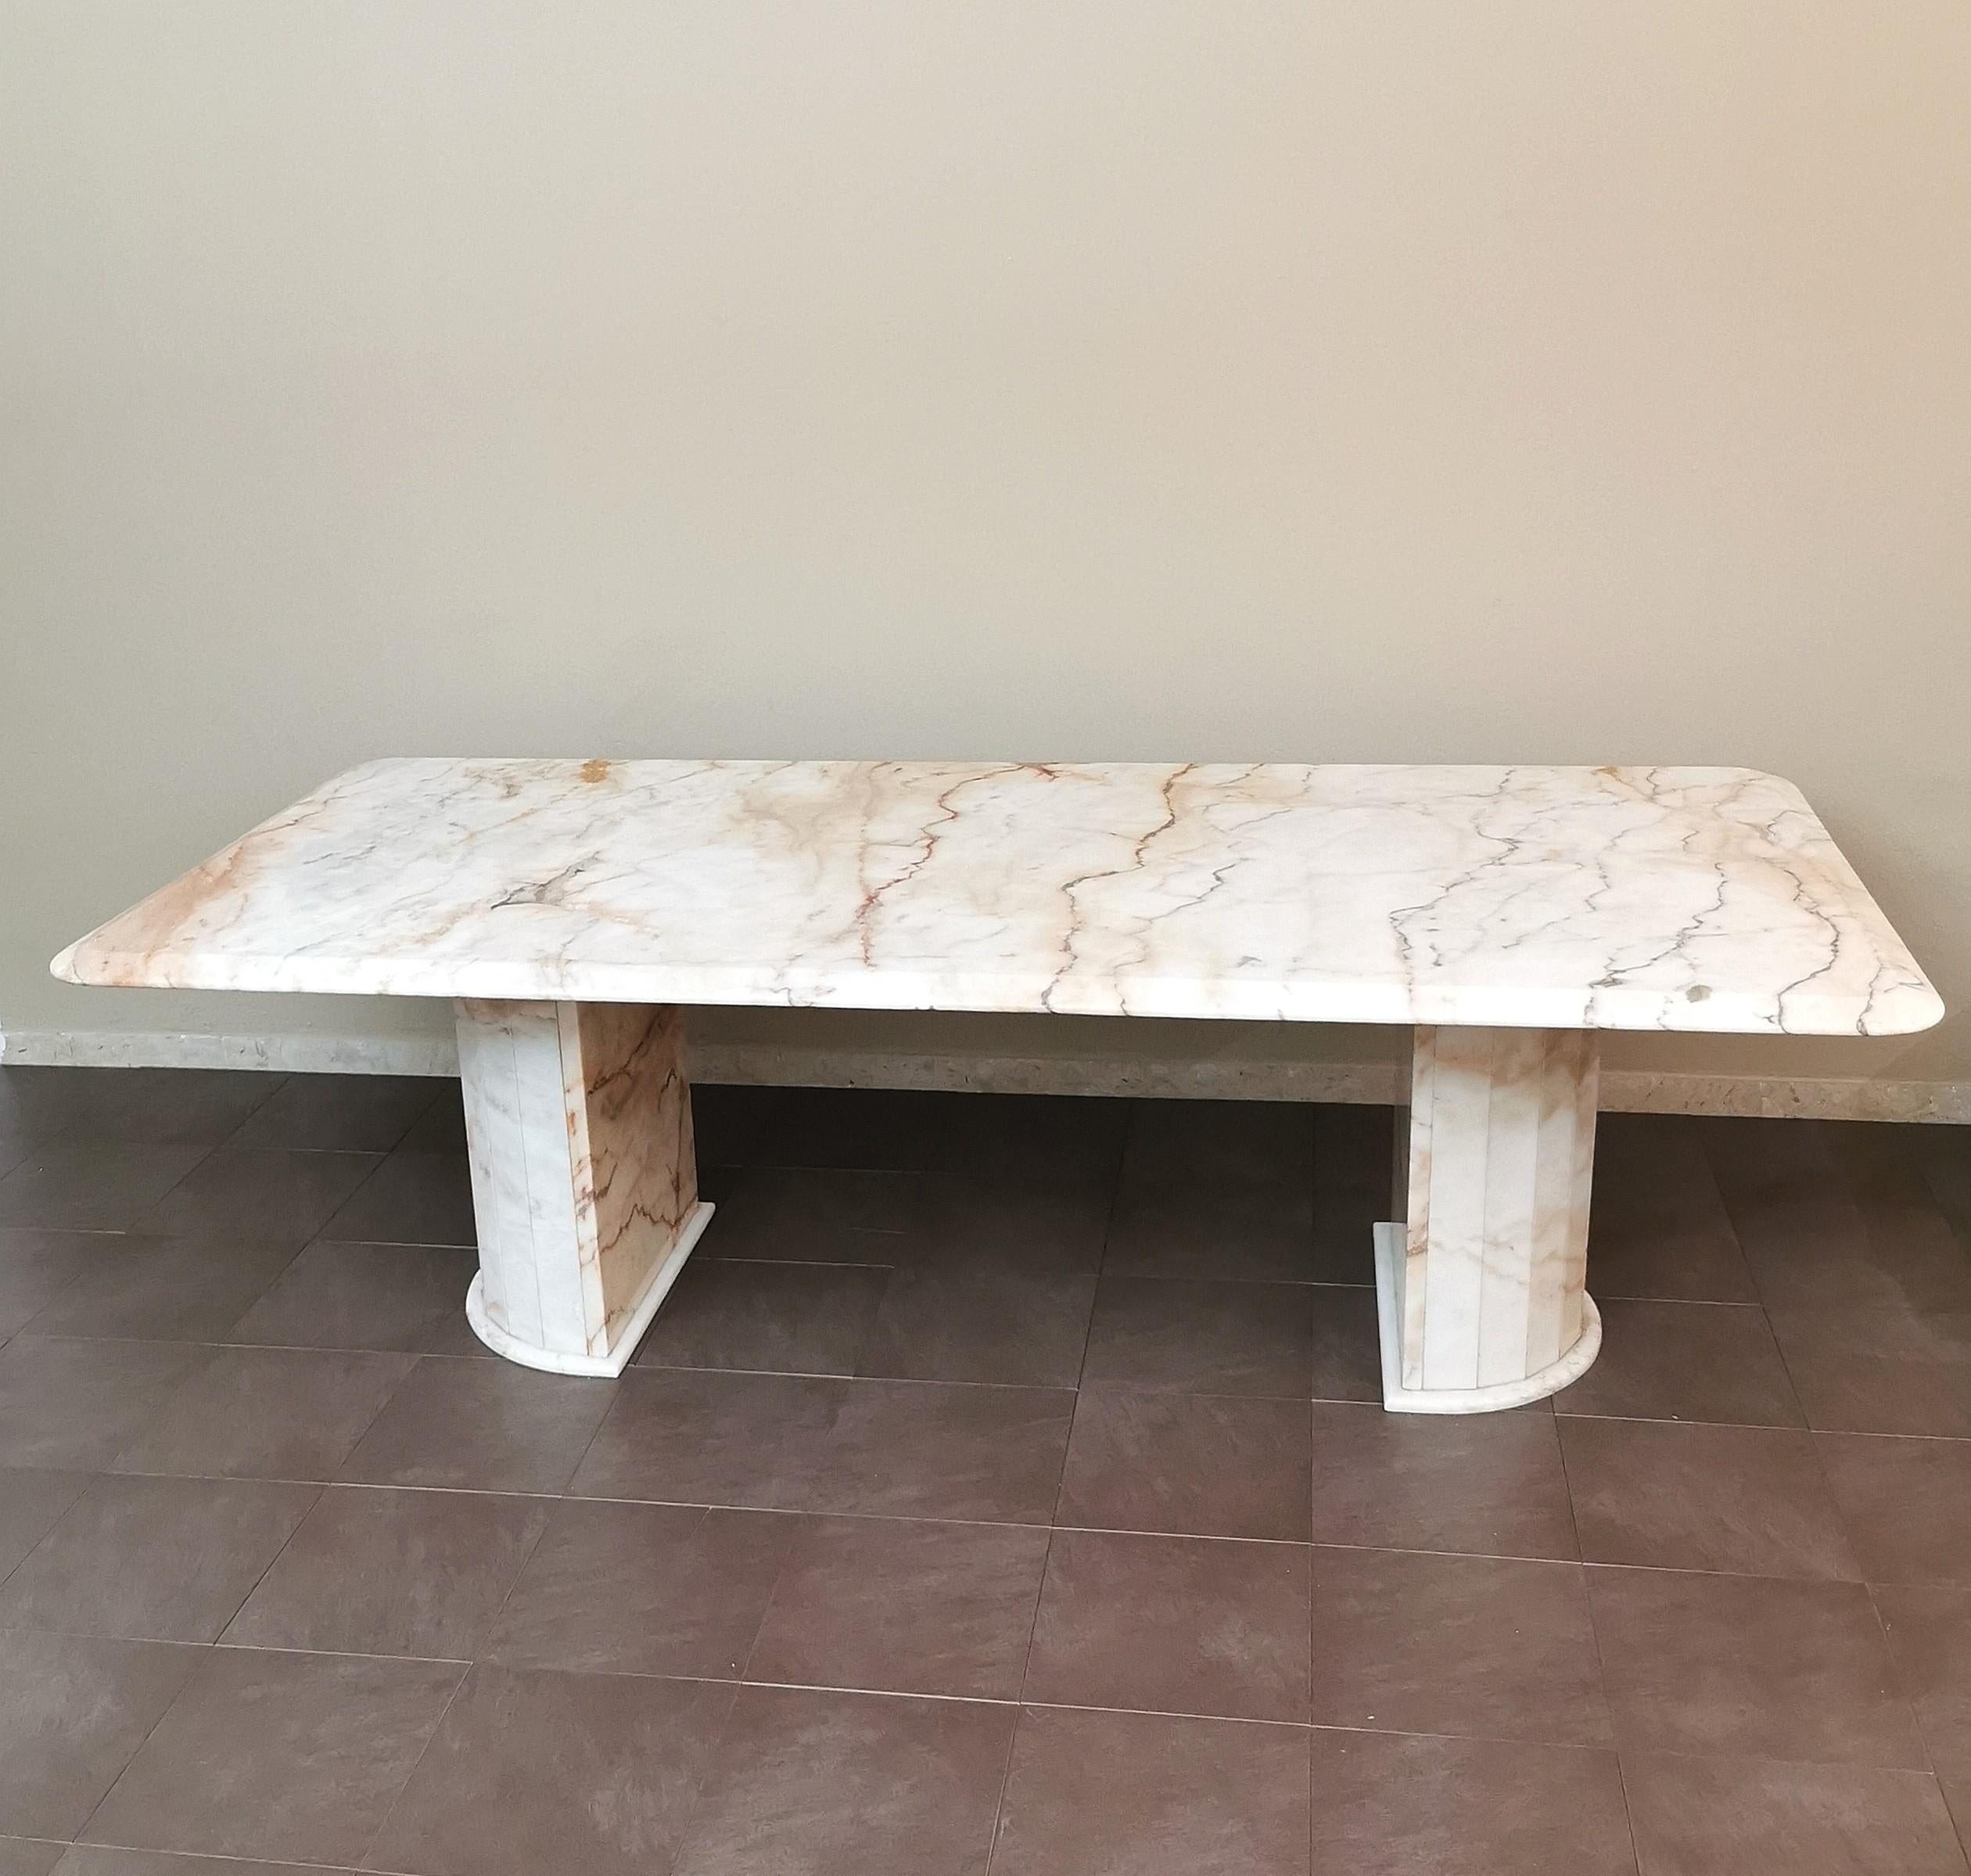 Imposing dining table produced in Italy in the 70s. The table was made with a large rectangular pink and white marble top with a beveled border that rests on two columns in the shape of a semicircle, also in pink and white marble.



Note: We try to